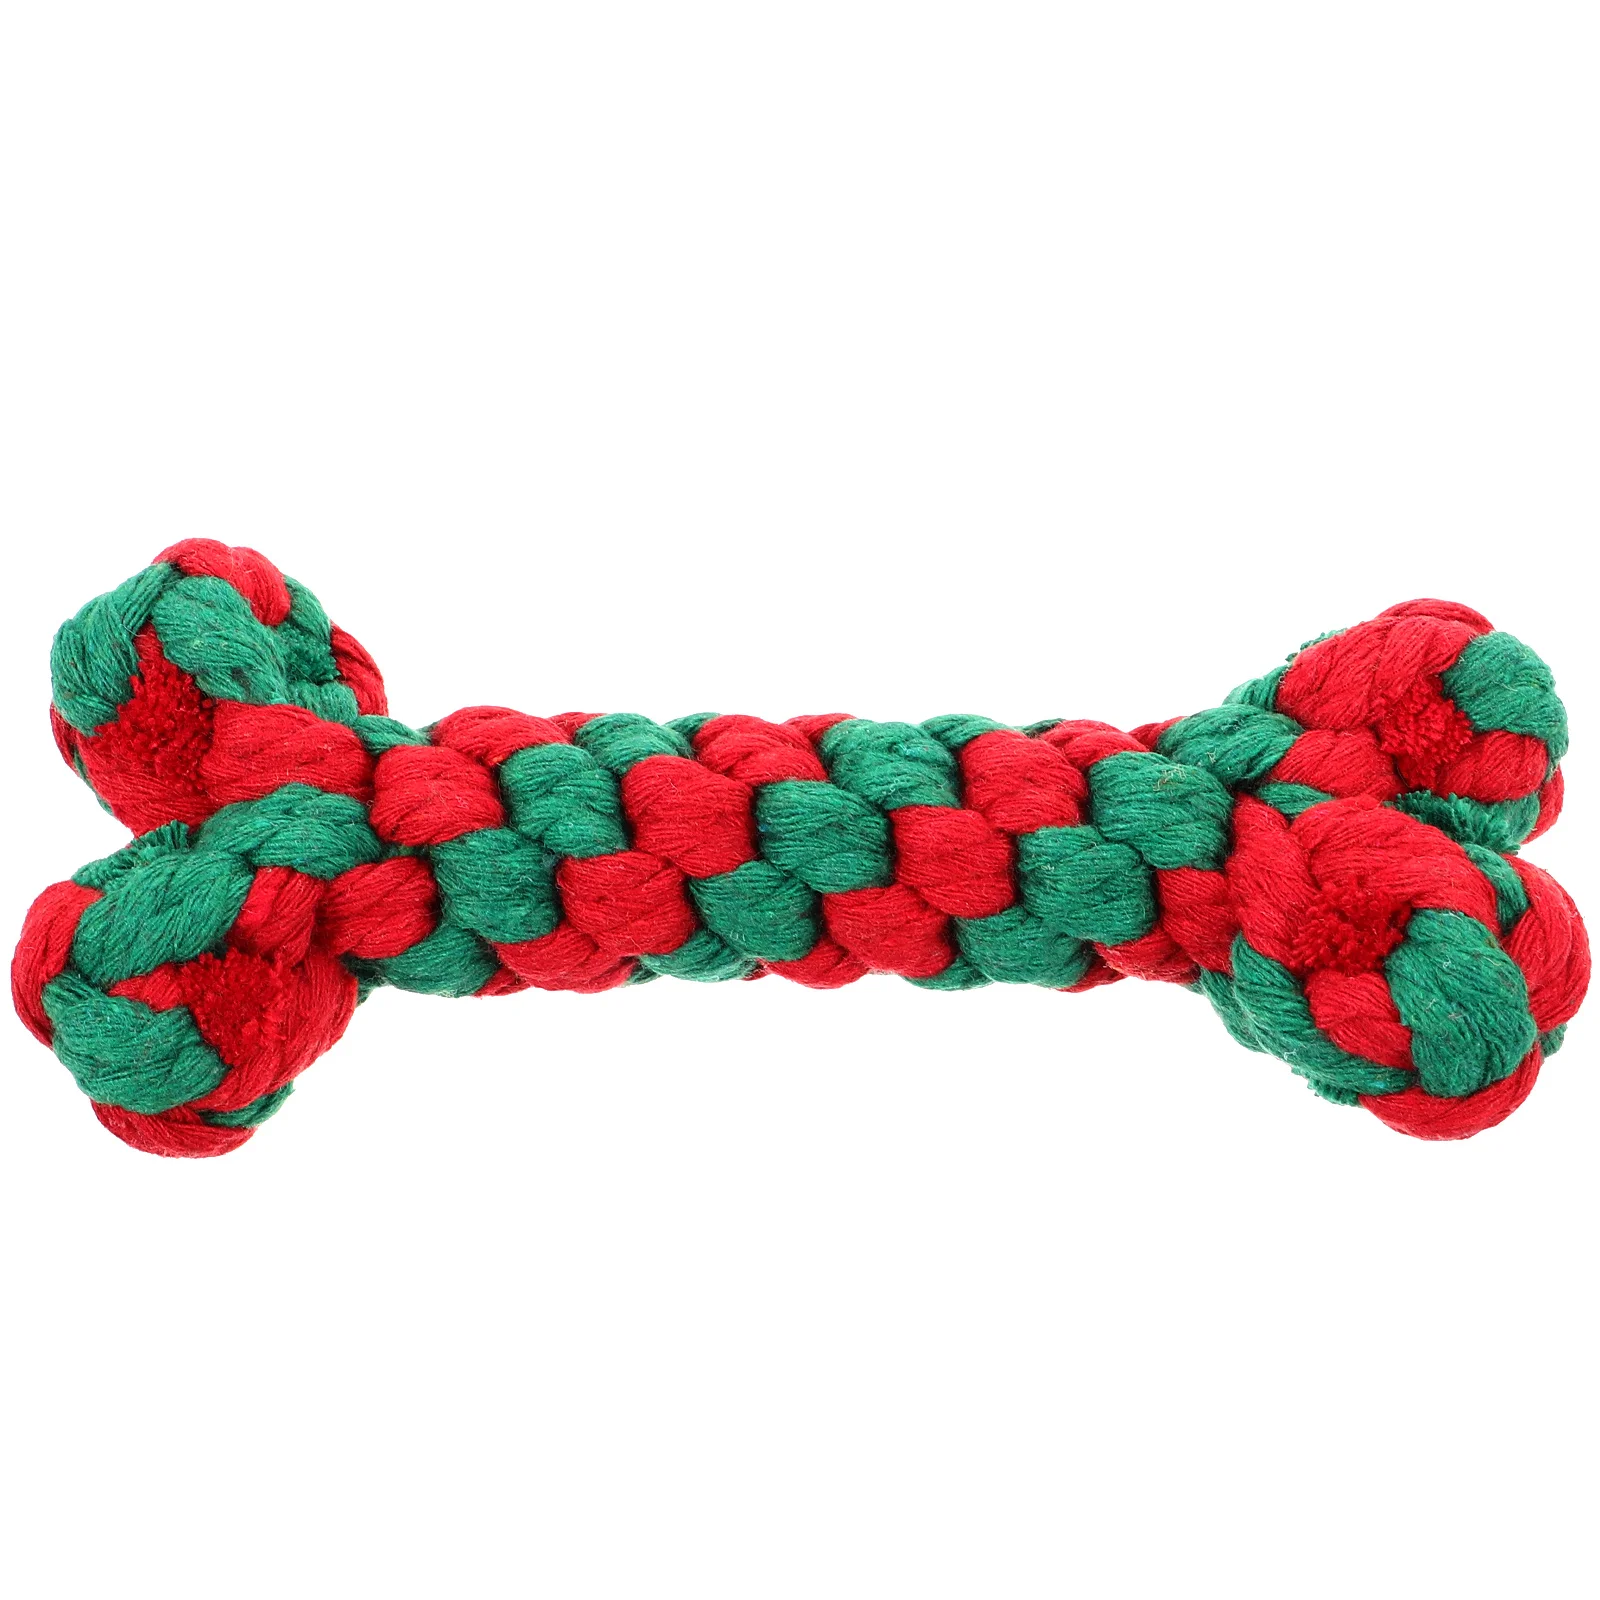 

Pet Bone Toy Dog Chew Rope Molar Teeth Plaything Xmas Gifts Cotton Bite Grinding Puppy Playtime Toys Puppies